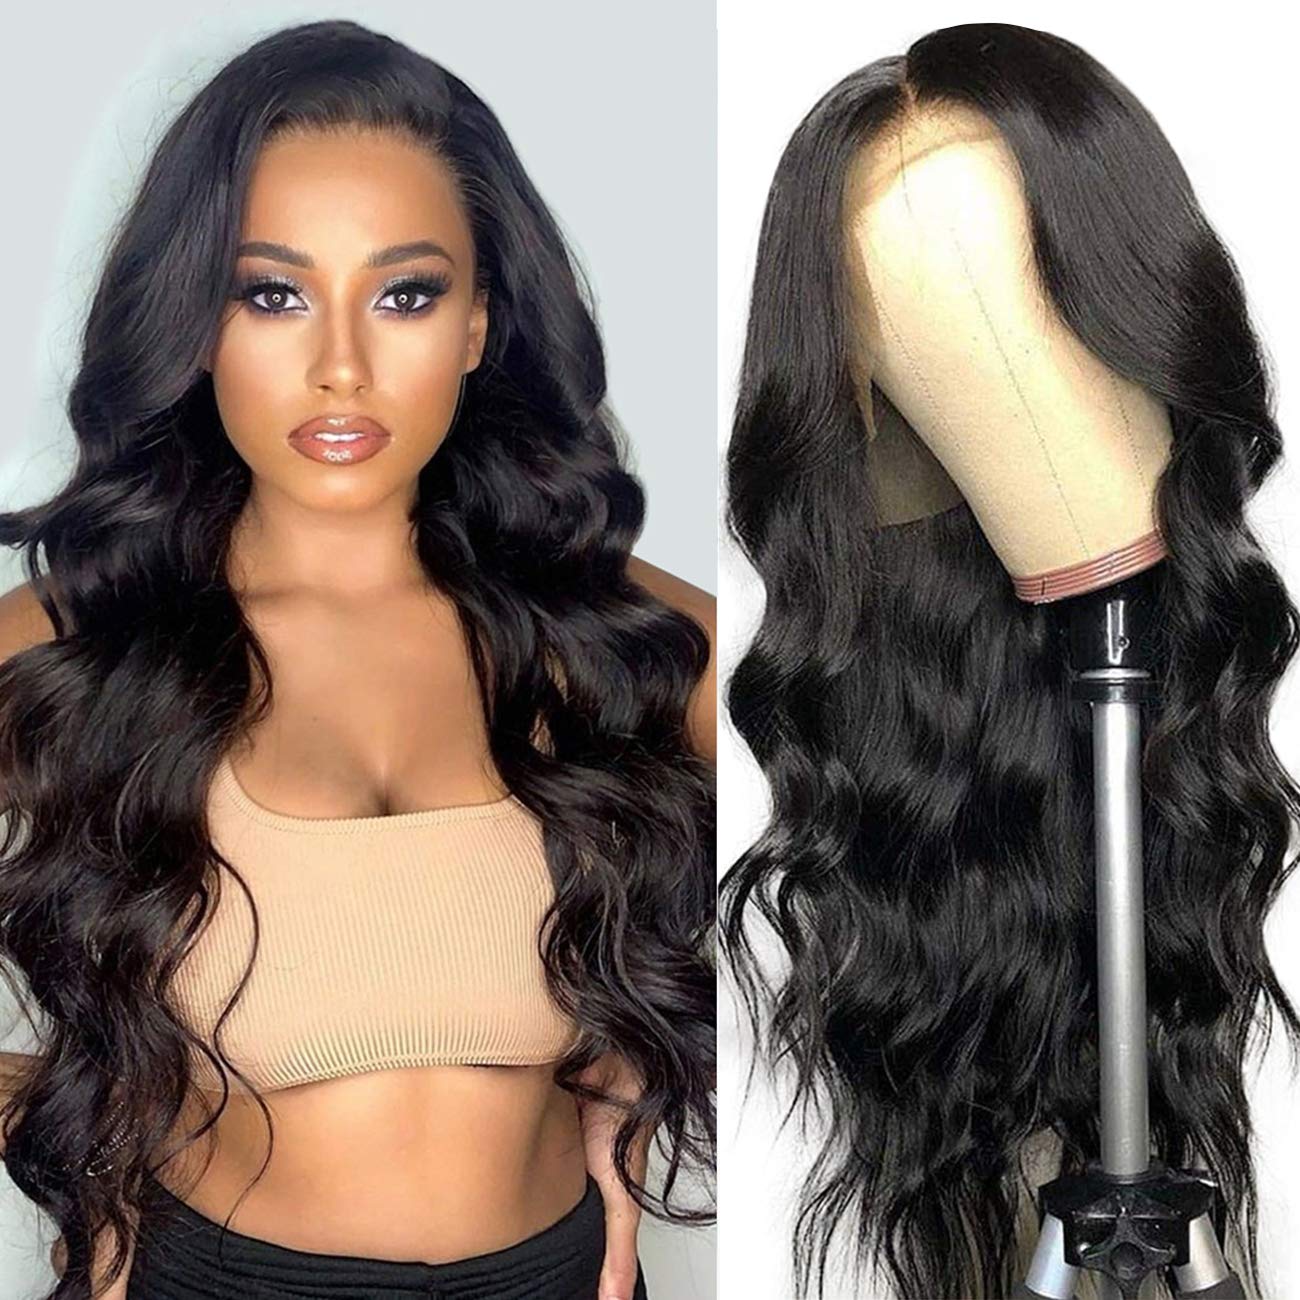 Price:$41.44     Persephone Wavy Lace Front Wigs for Women Glueless Black Synthetic Wig Natural Color Hair Heat Resistant 22 inch 180% Density   Beauty